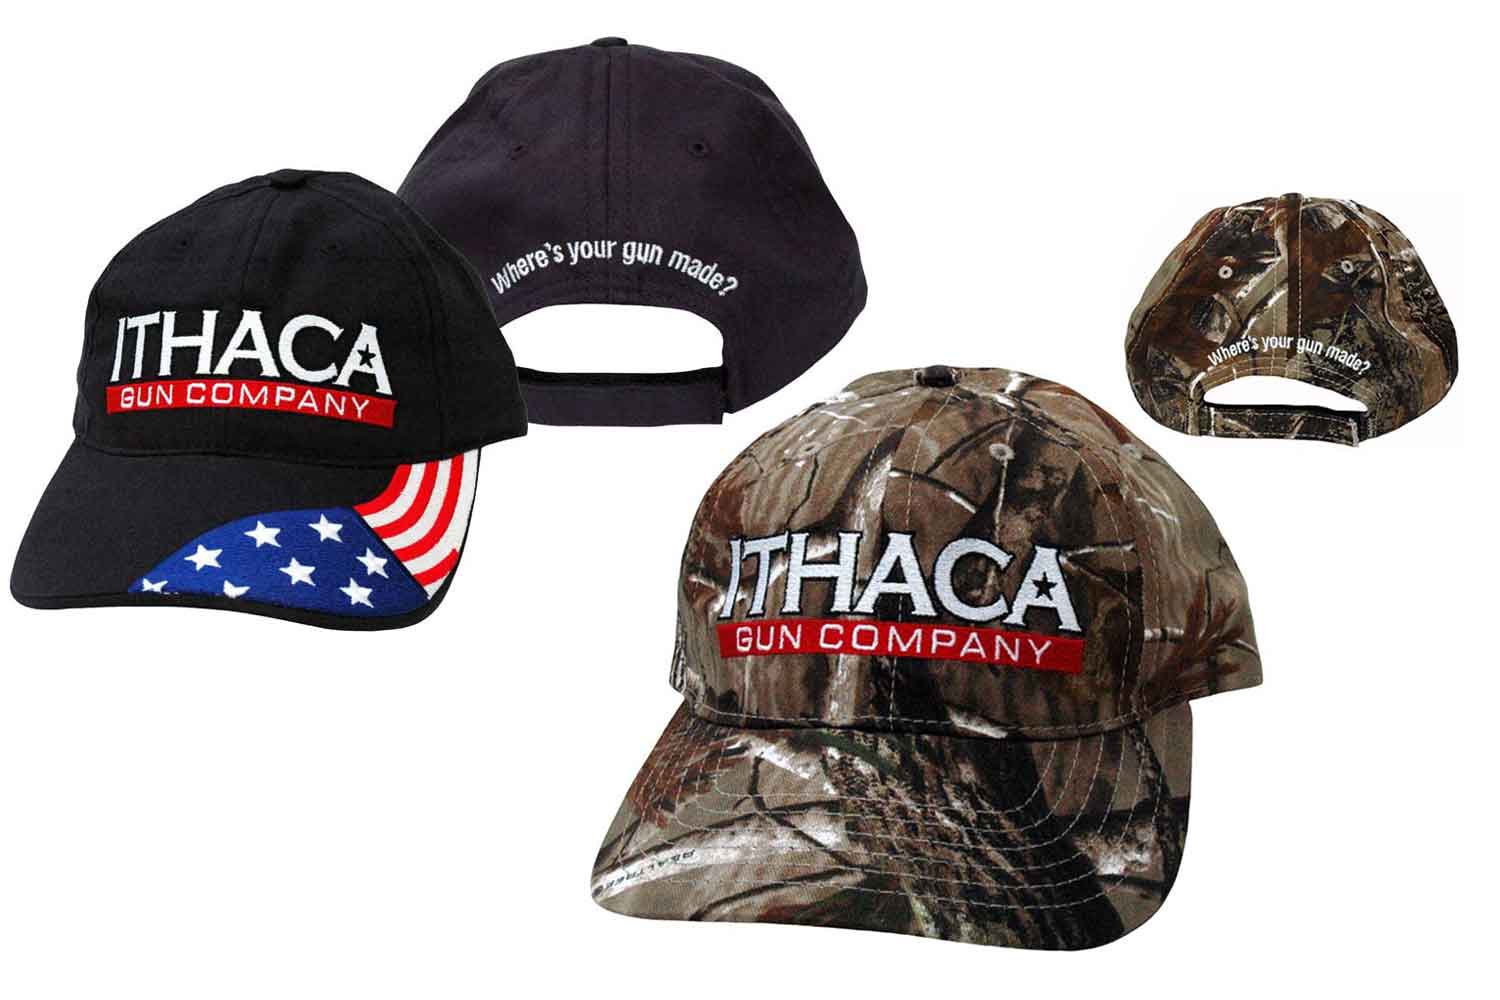 Ithaca Clothing & Accessories